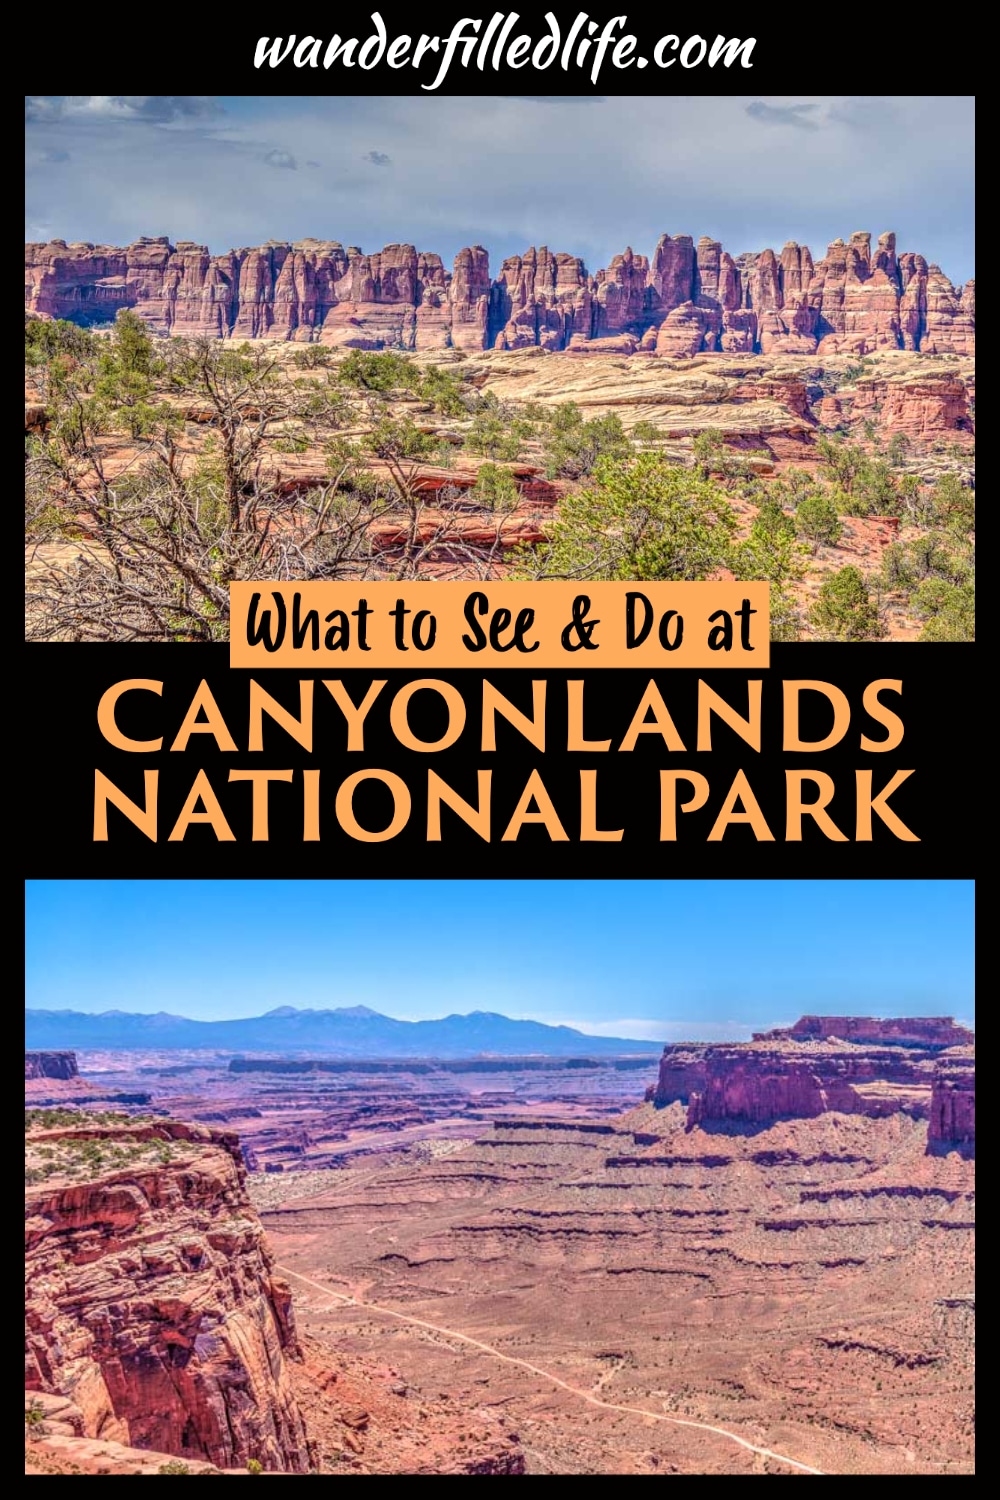 Visiting Utah's national parks? Our Canyonlands National Park itinerary will help you plan a two-day visit to this majestic landscape.